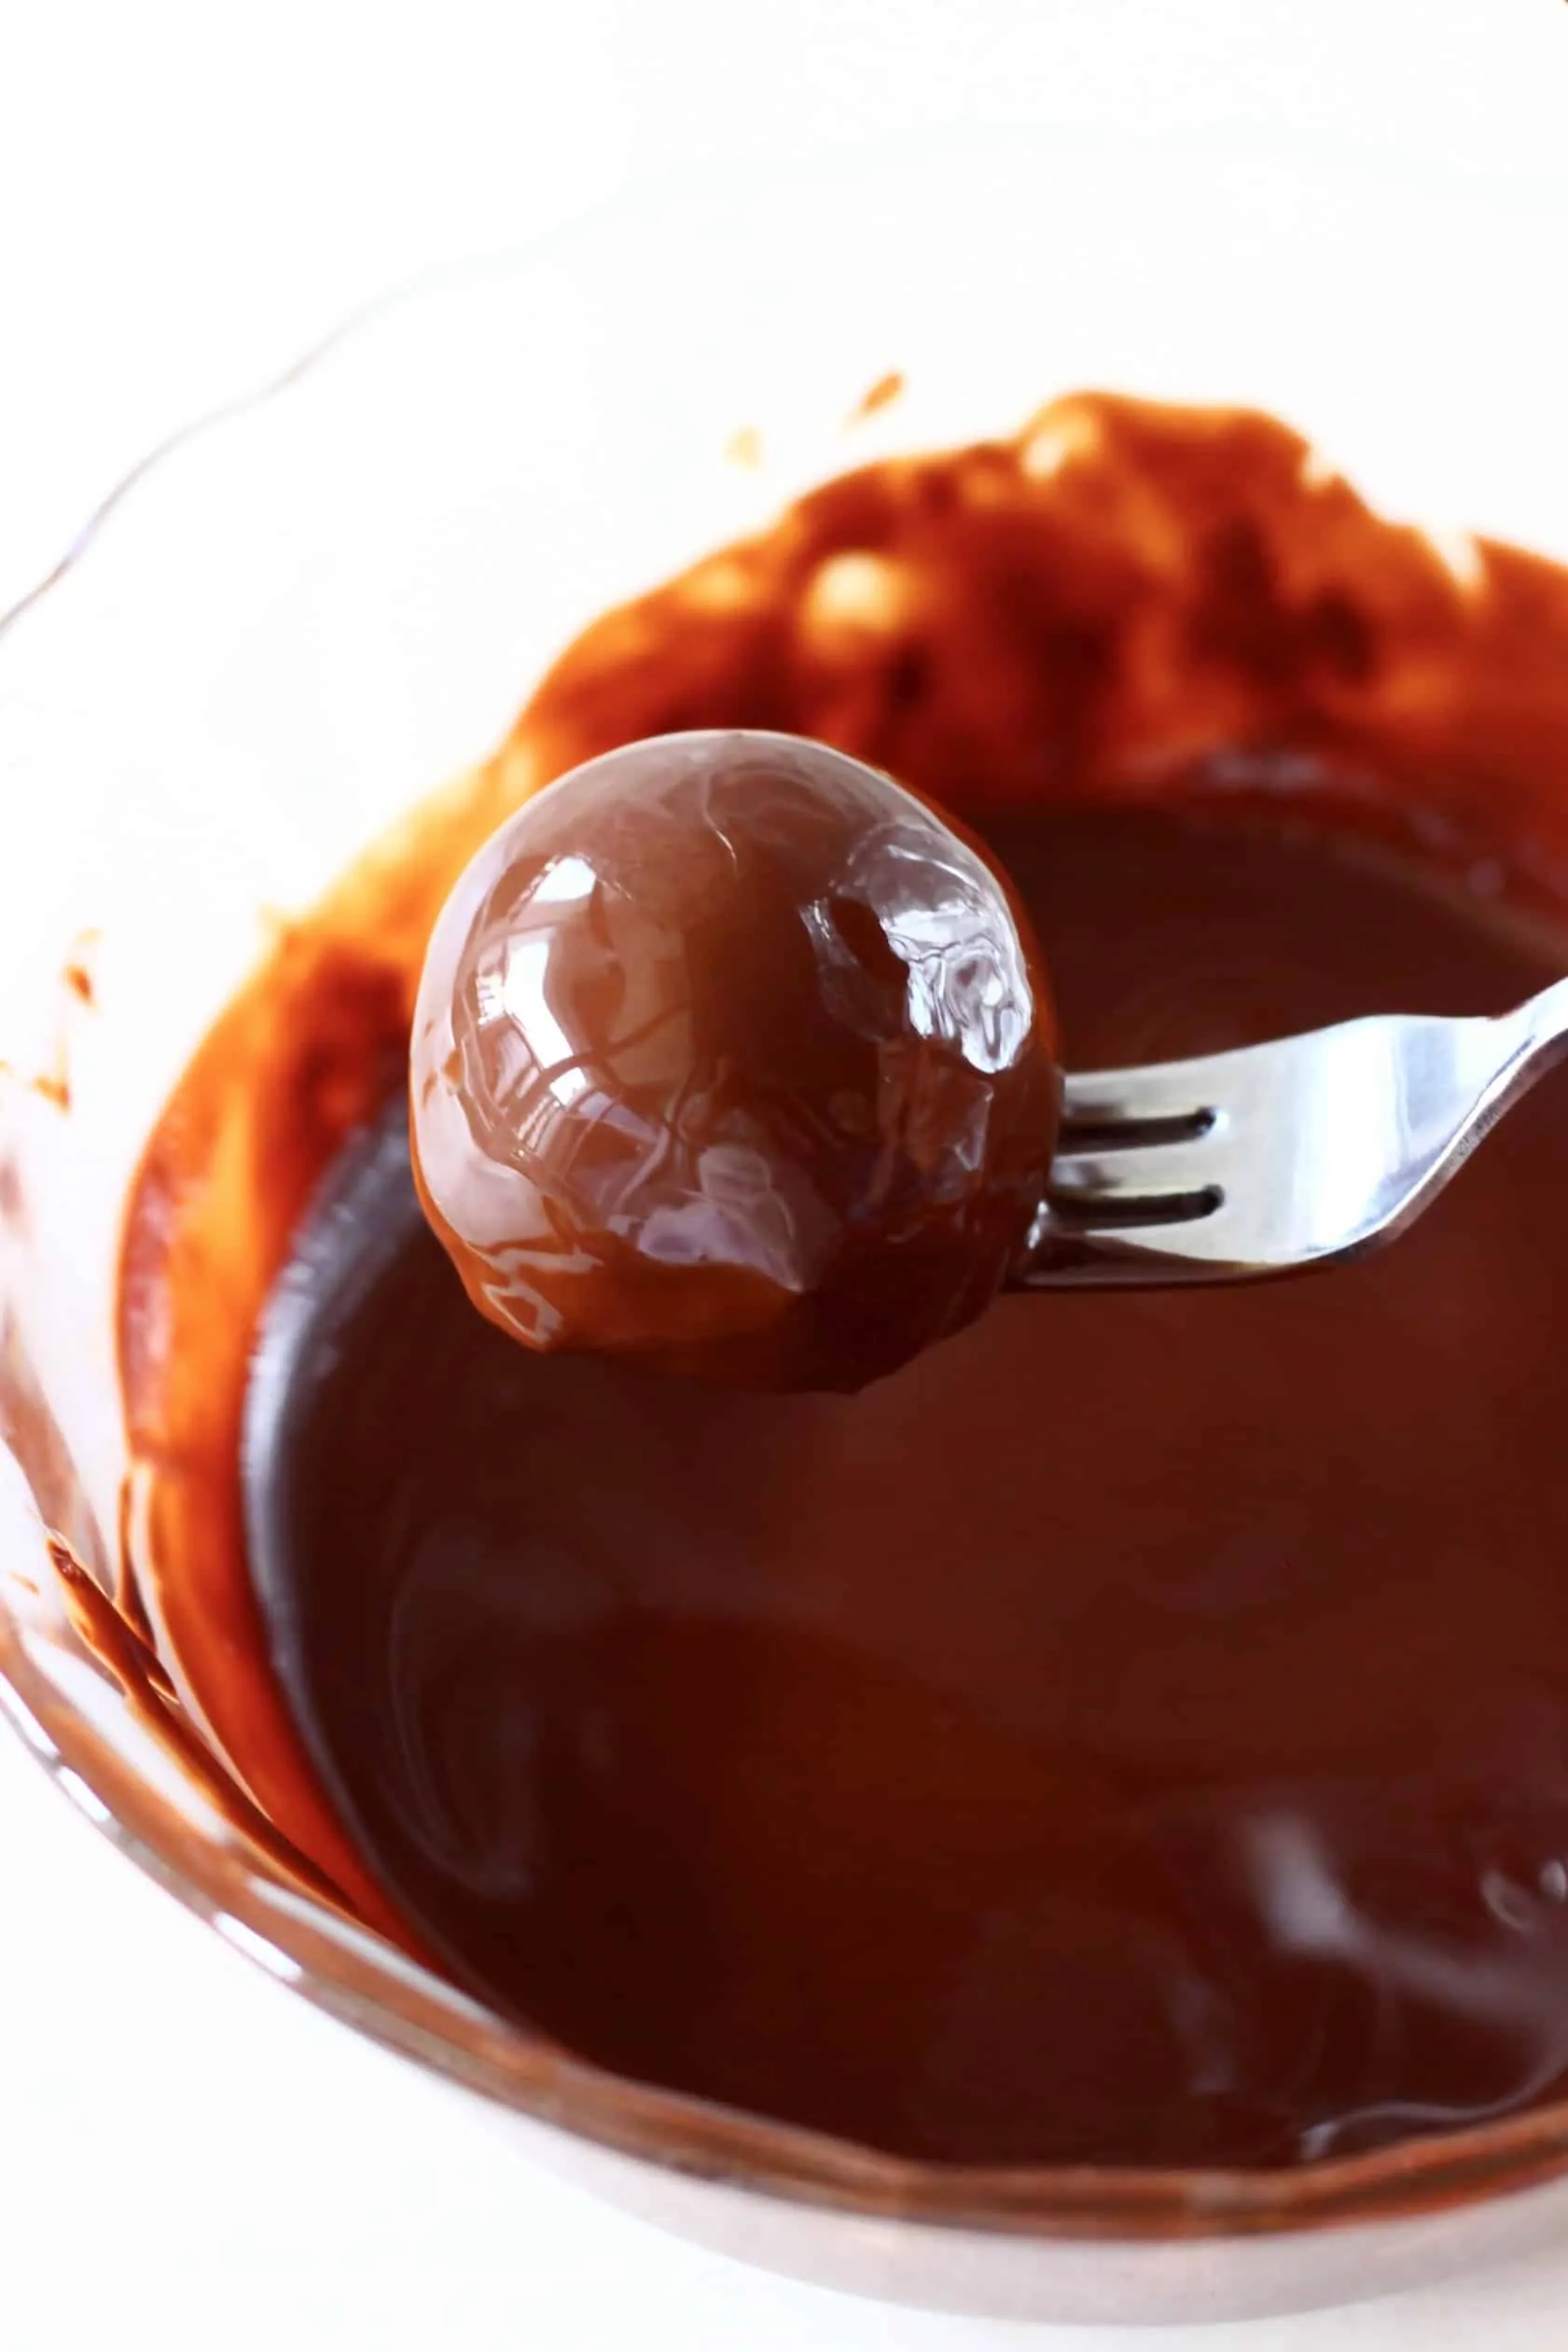 A healthy peanut butter ball being lifted out of a bowl of melted chocolate with a fork